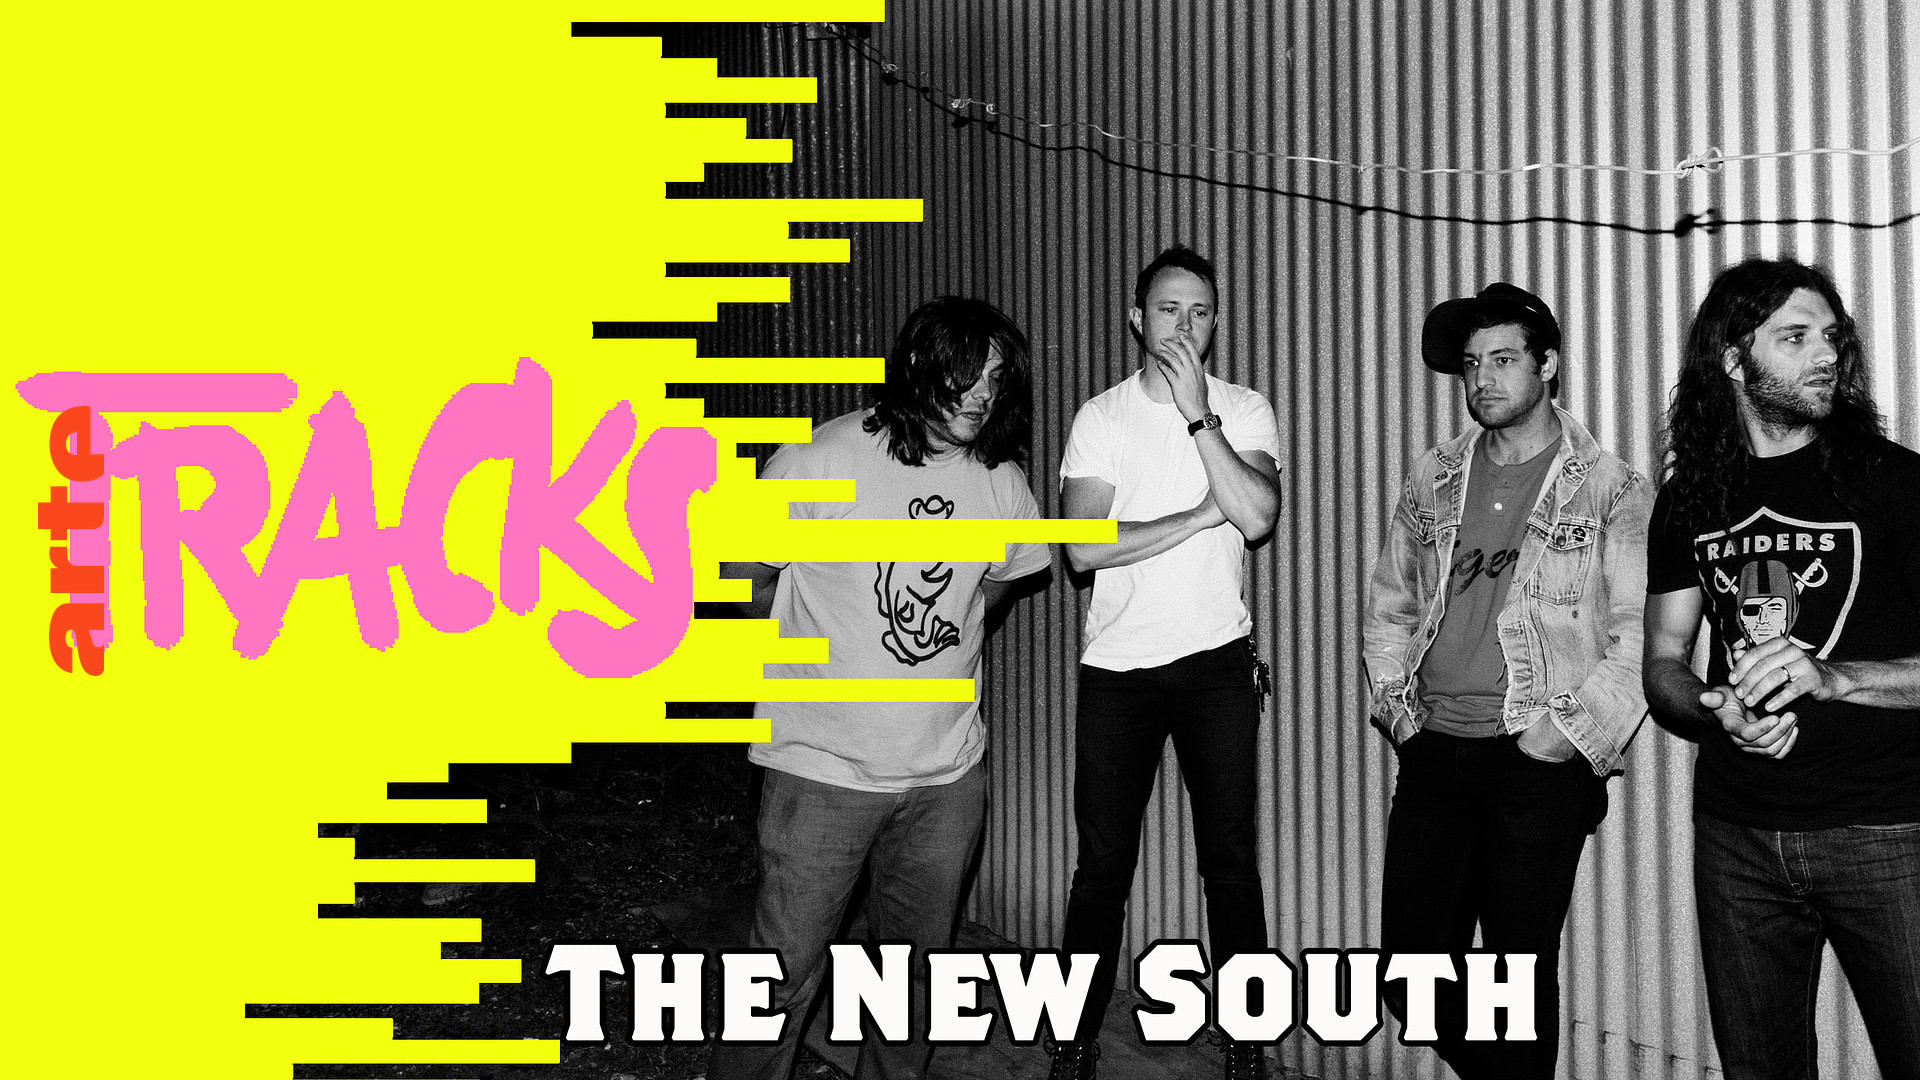 The New South | TRACKS